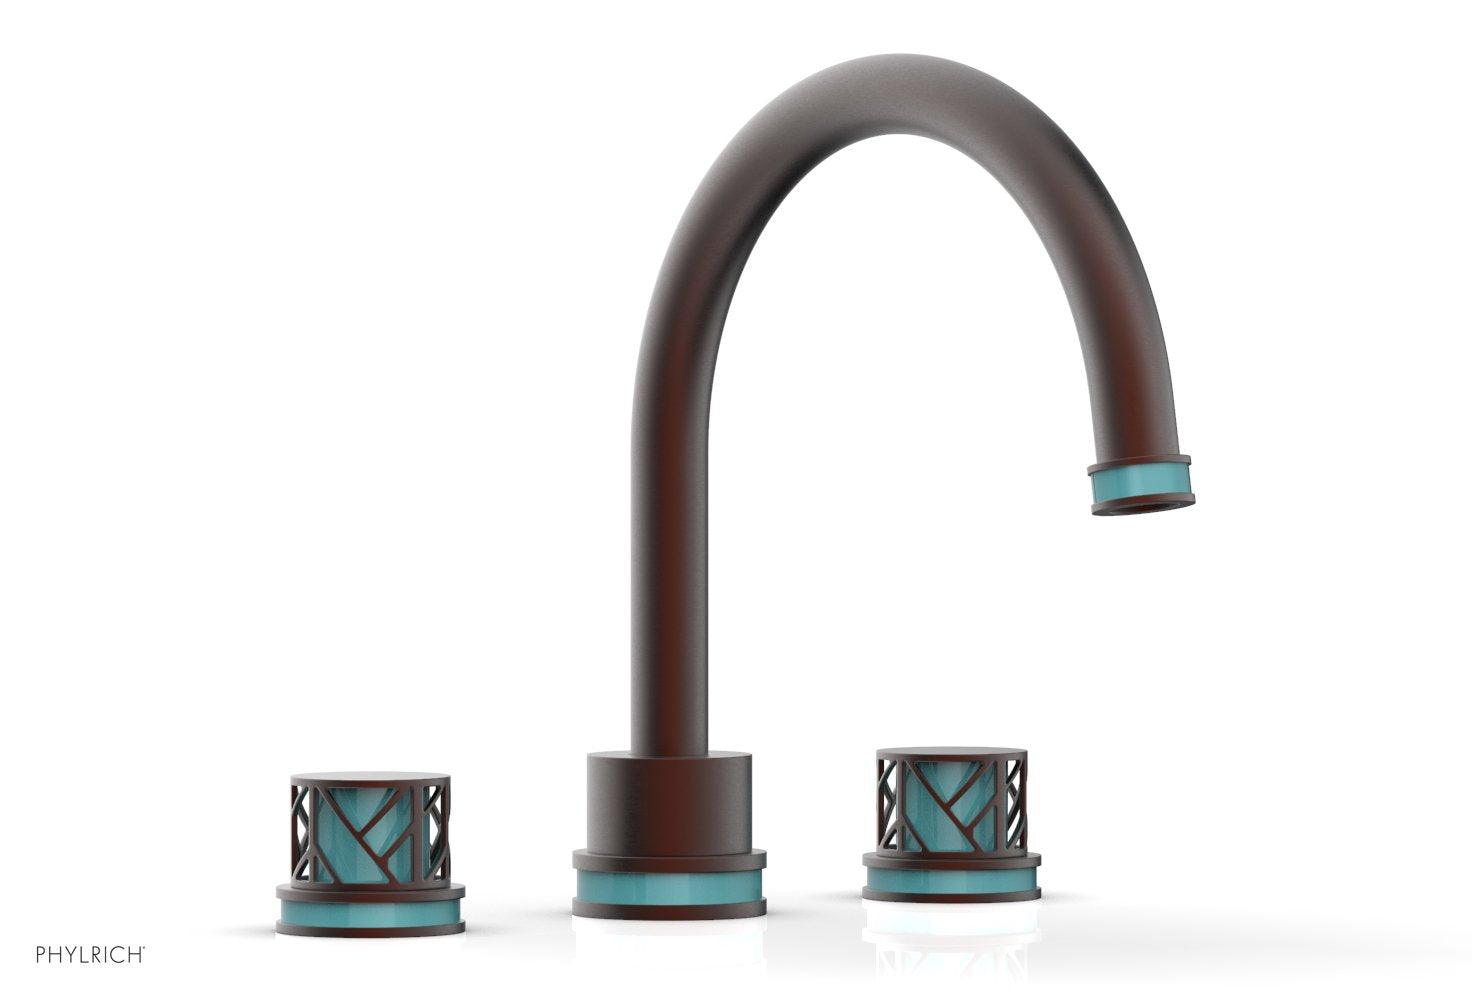 Phylrich JOLIE Deck Tub Set - Round Handles with "Turquoise" Accents